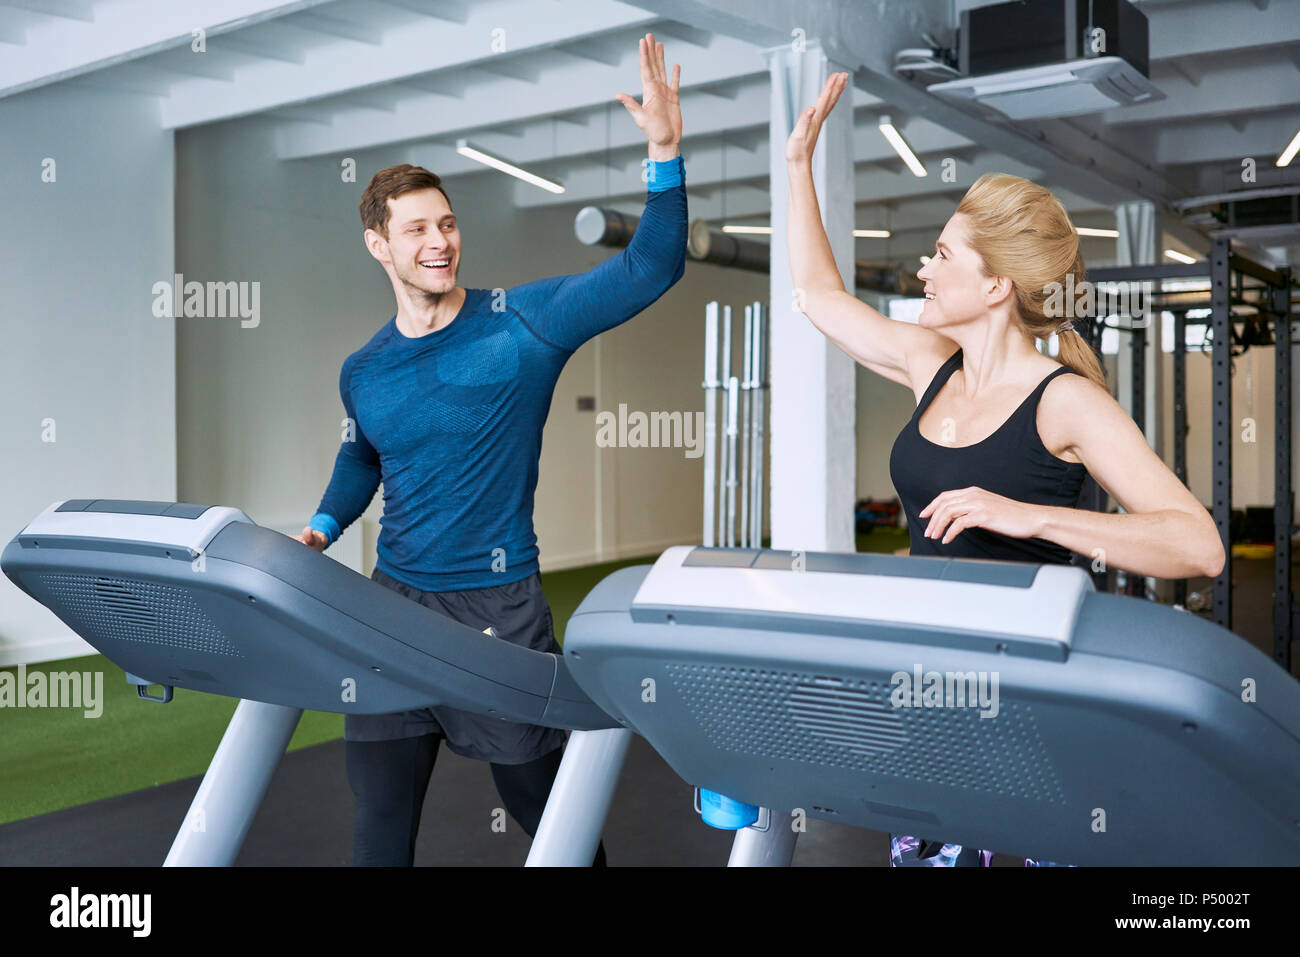 Happy man and woman doing high five during treadmill exercise at gym Stock Photo